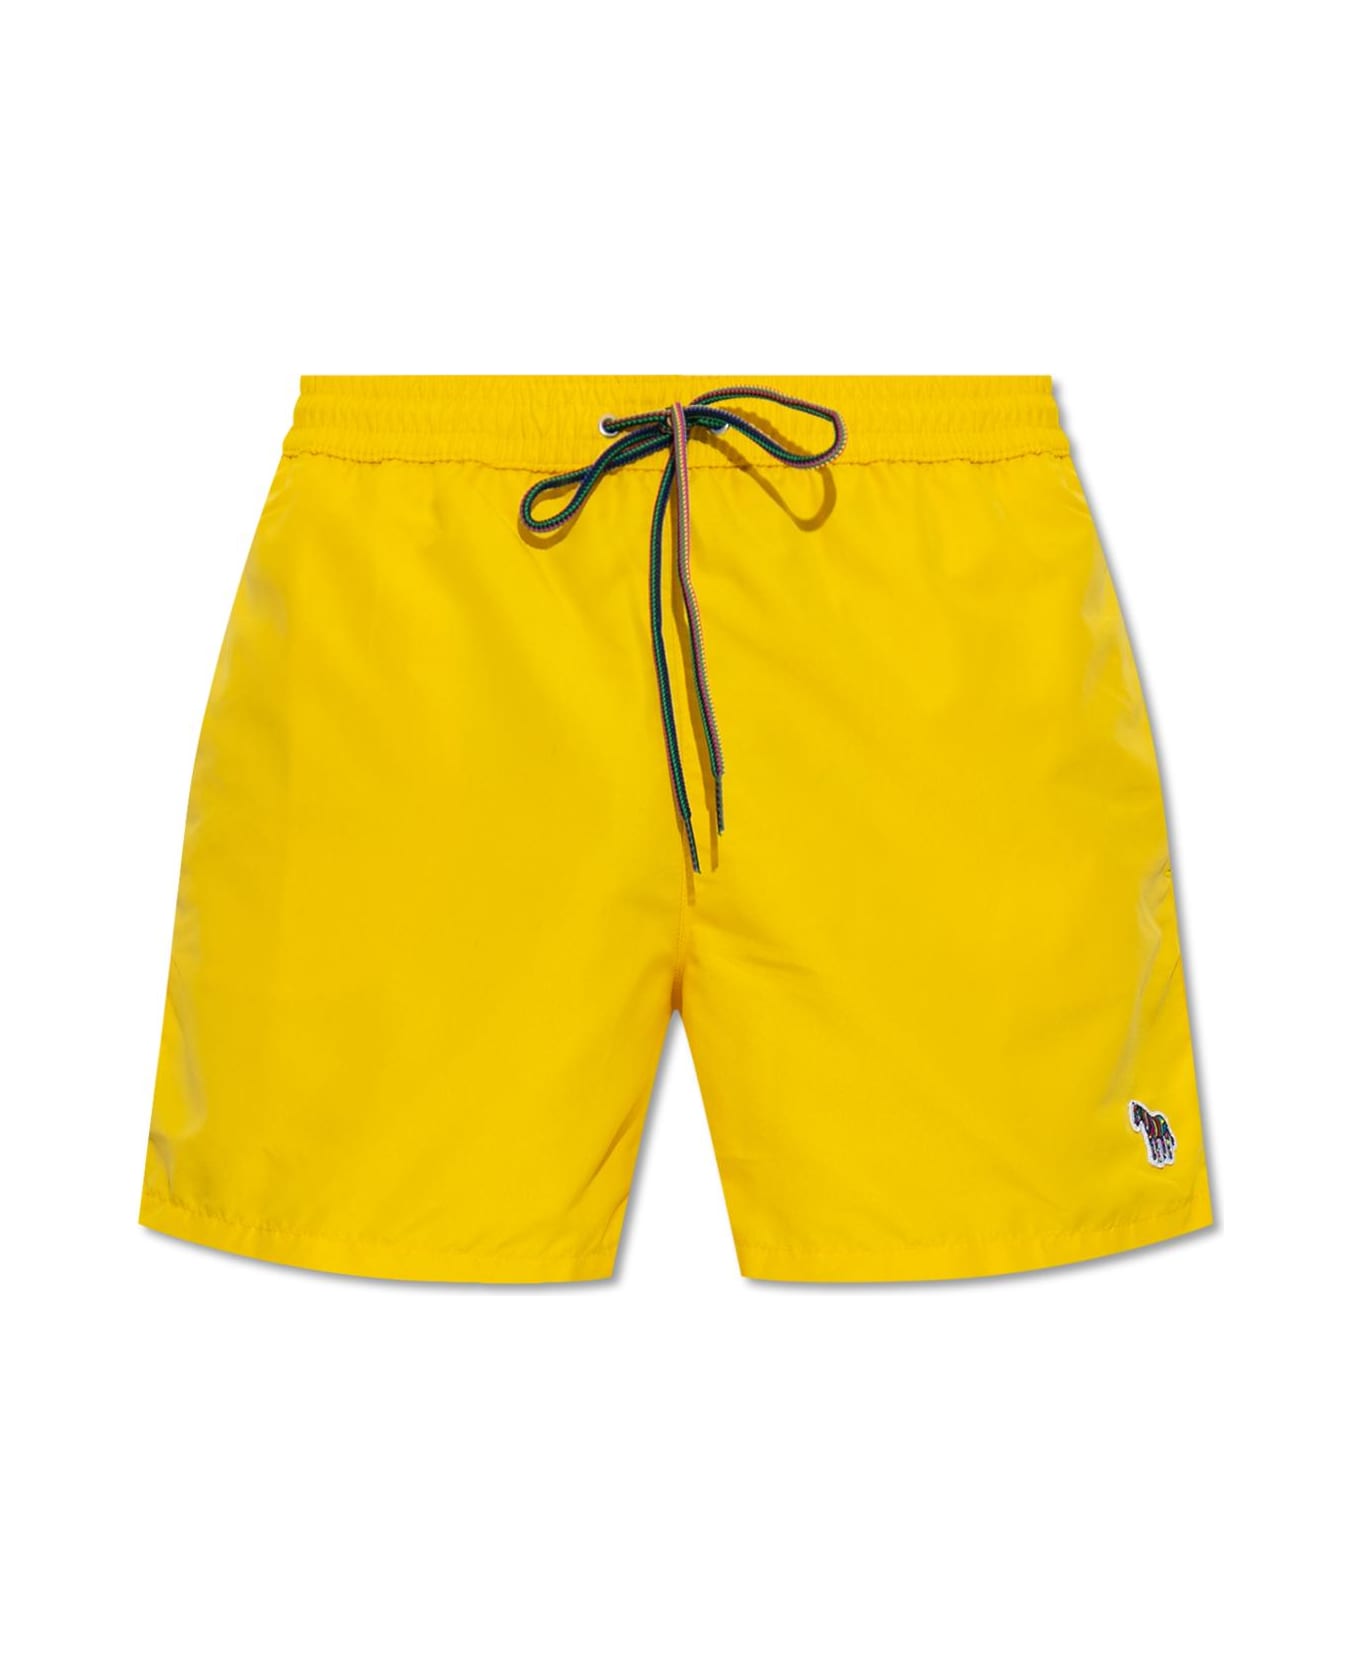 Paul Smith Swimming Shorts With Patch - Yellow スイムトランクス